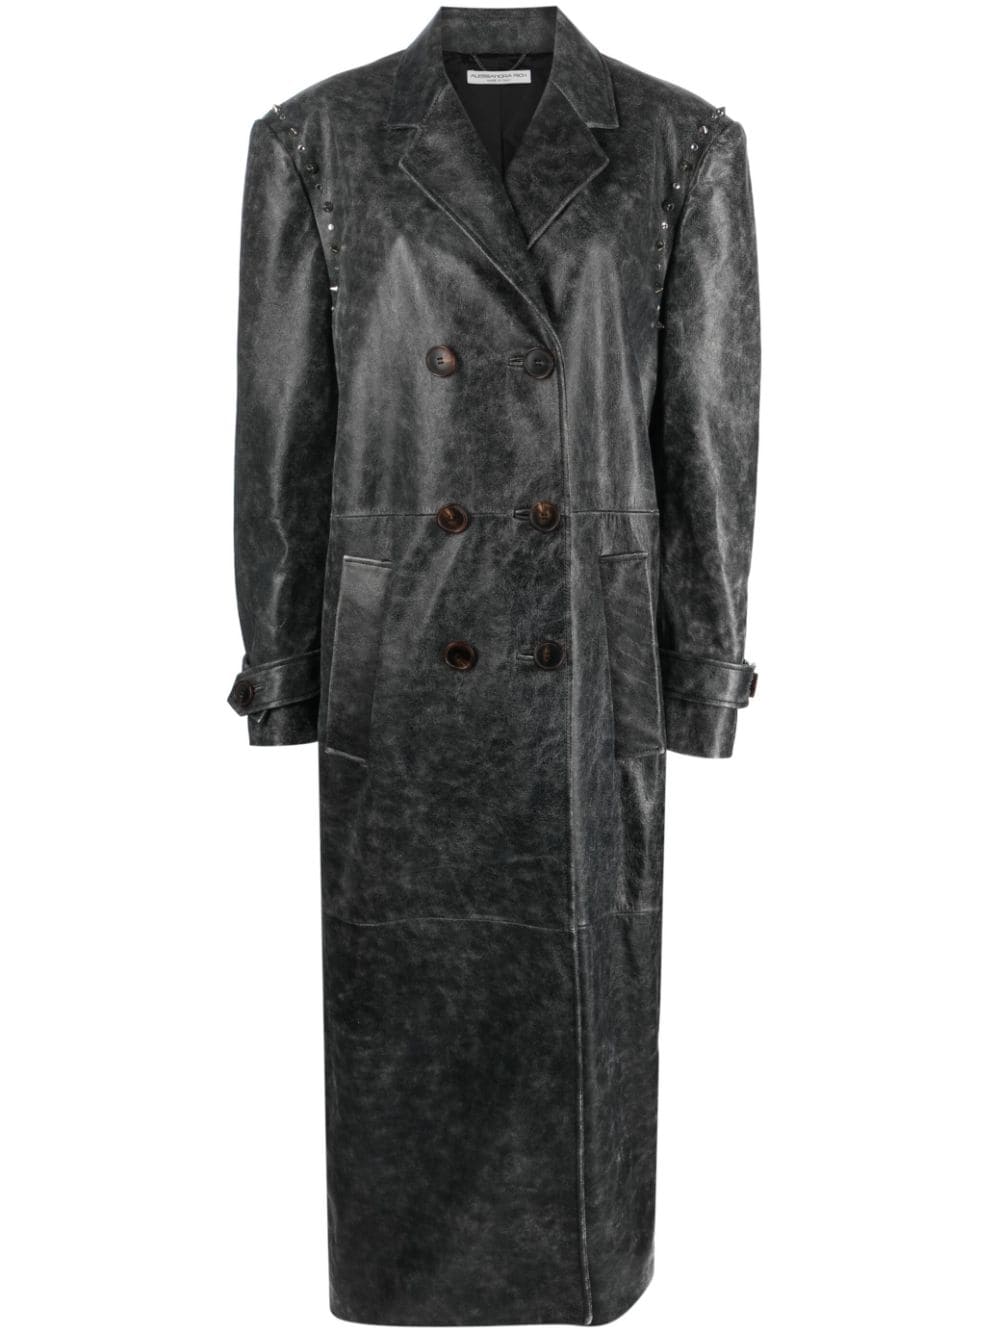 Image 1 of Alessandra Rich studded leather coat